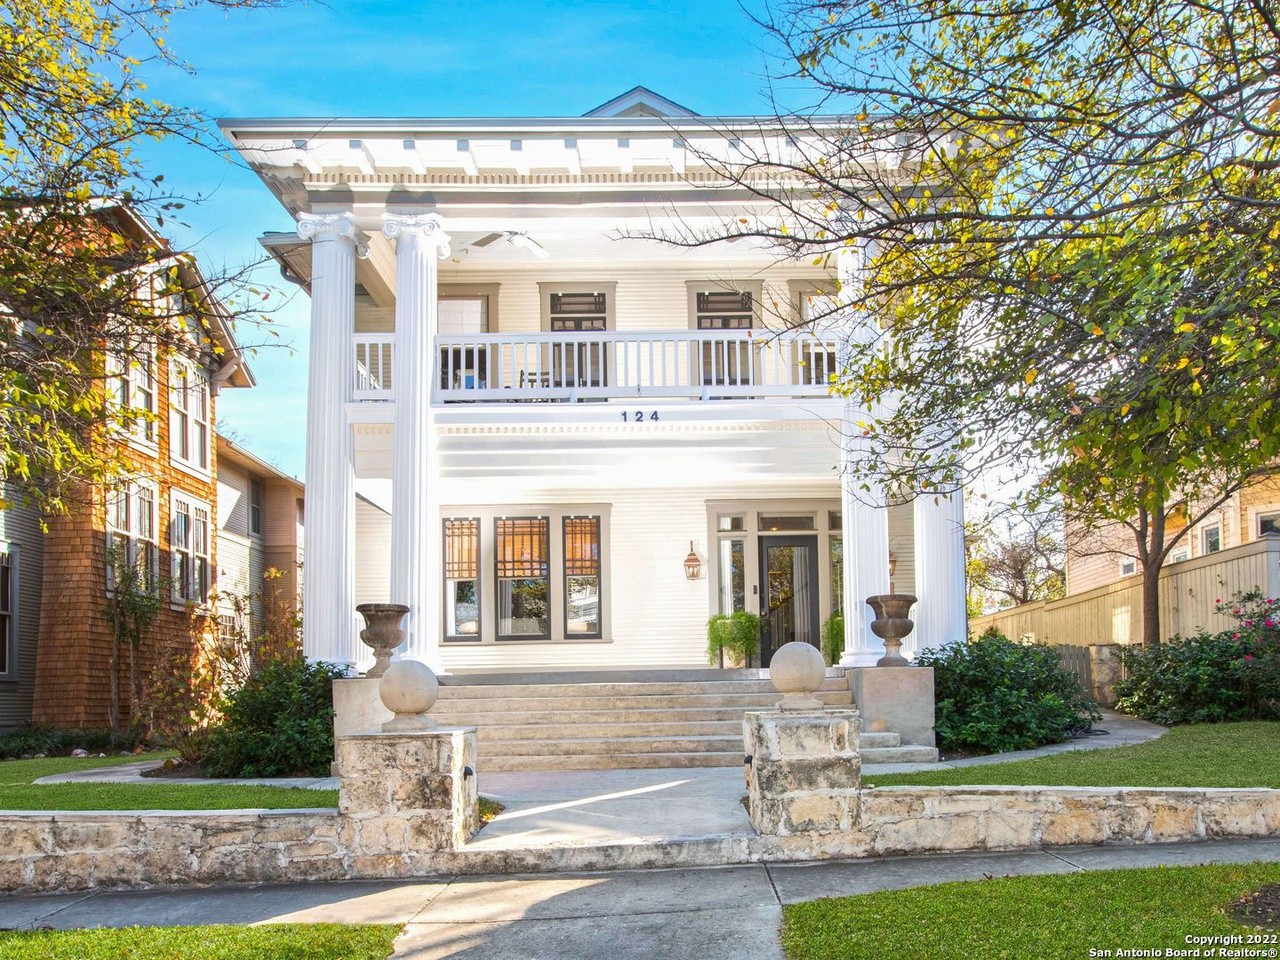 This restored 1913 San Antonio home includes a dining area that opens into a sunroom